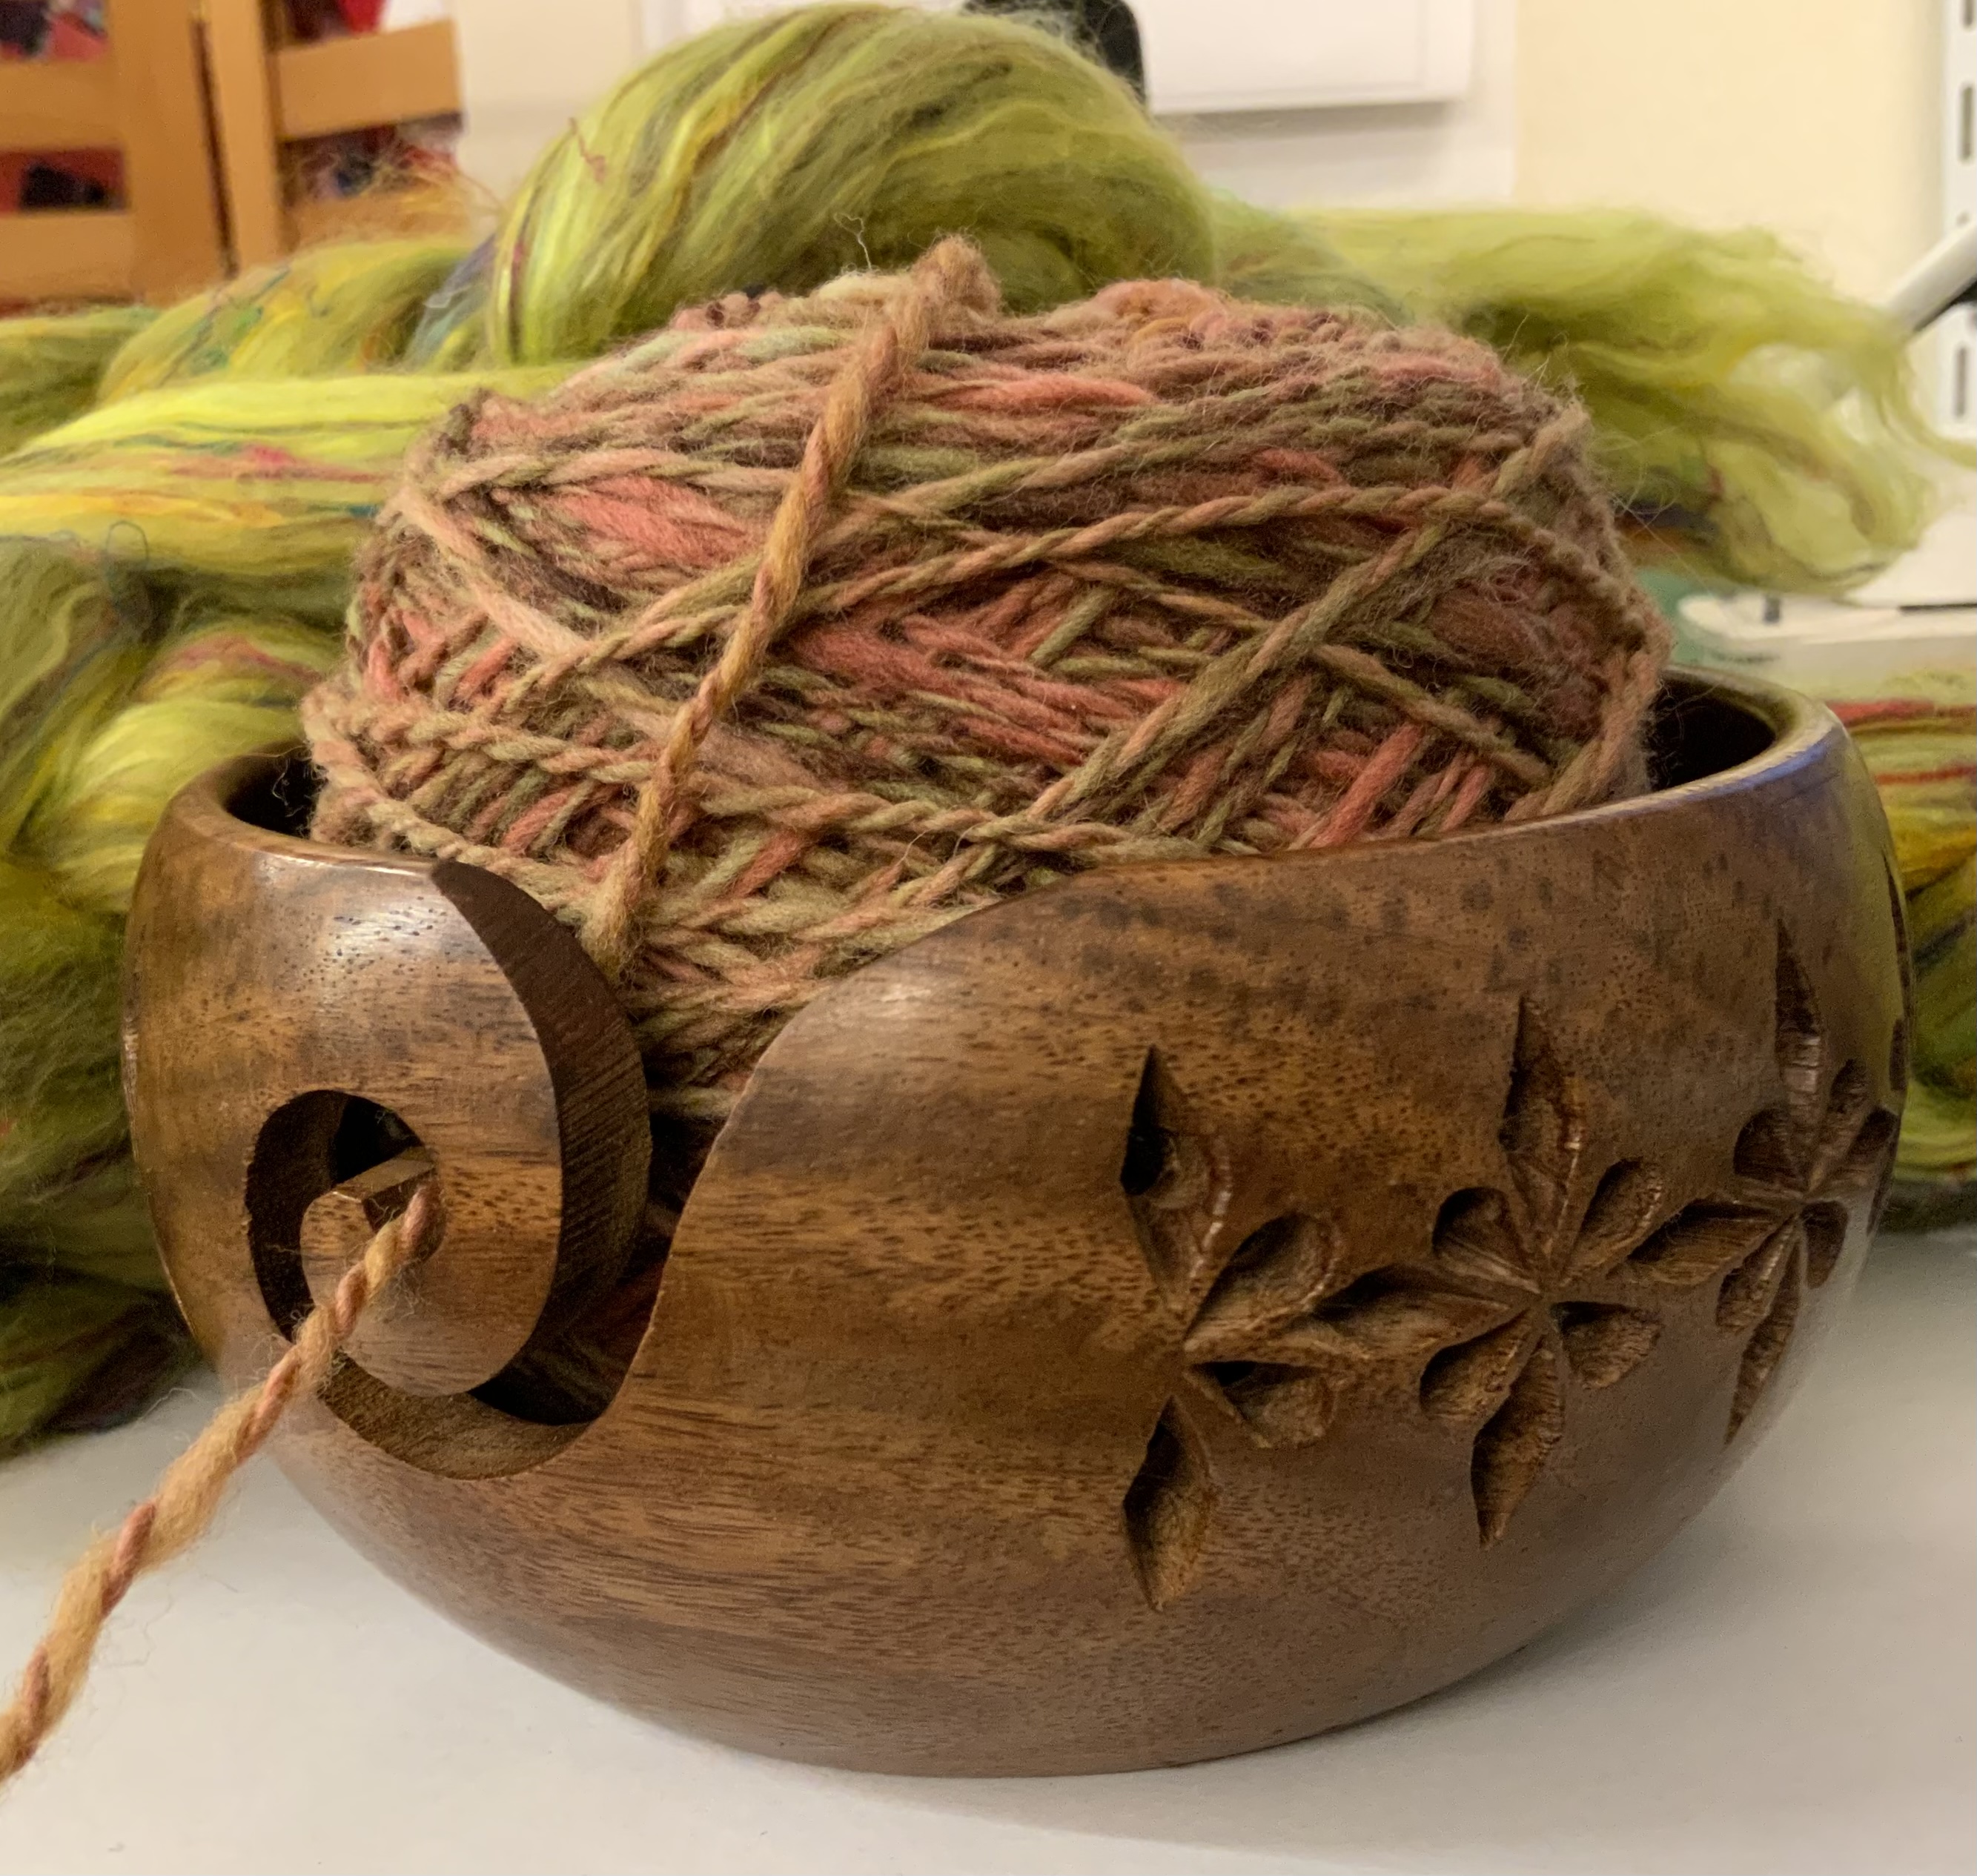 Yarn Bowl - Hand Carved Wooden Yarn Bowl for Knitting with Friends